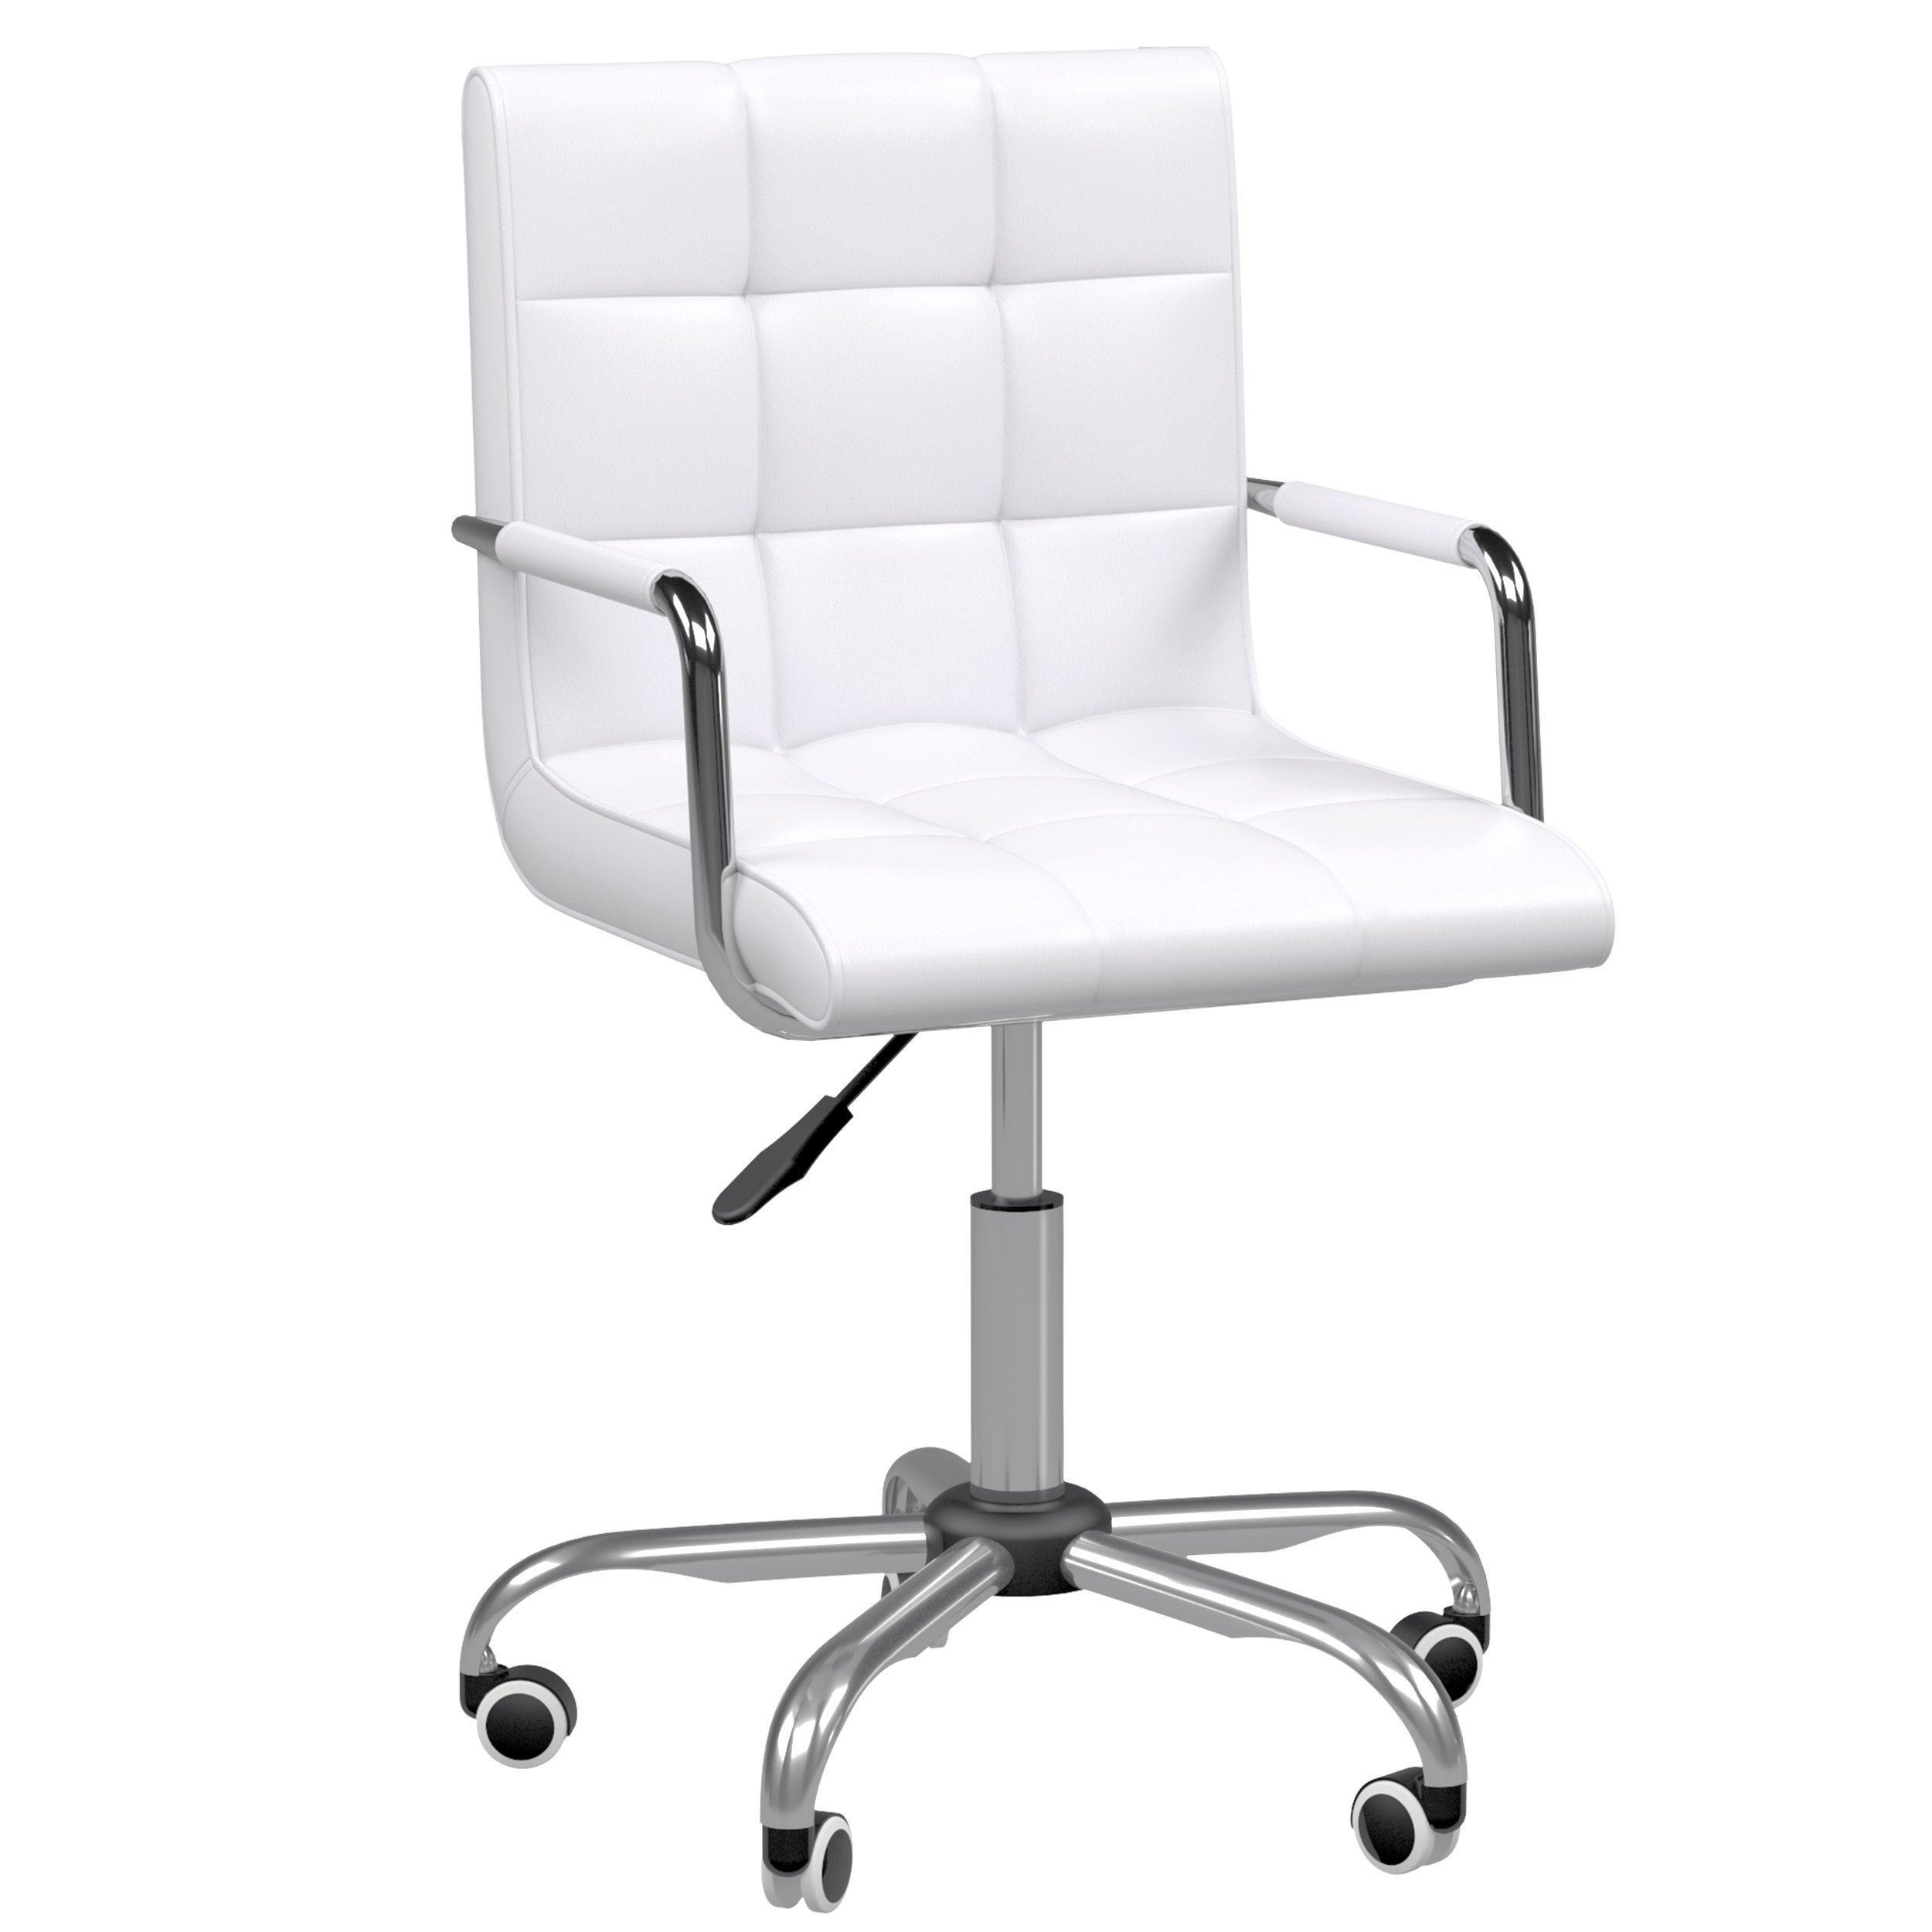 Mid Back PU Leather Home Office Chair Swivel Desk Chair Arm Wheel - image 1